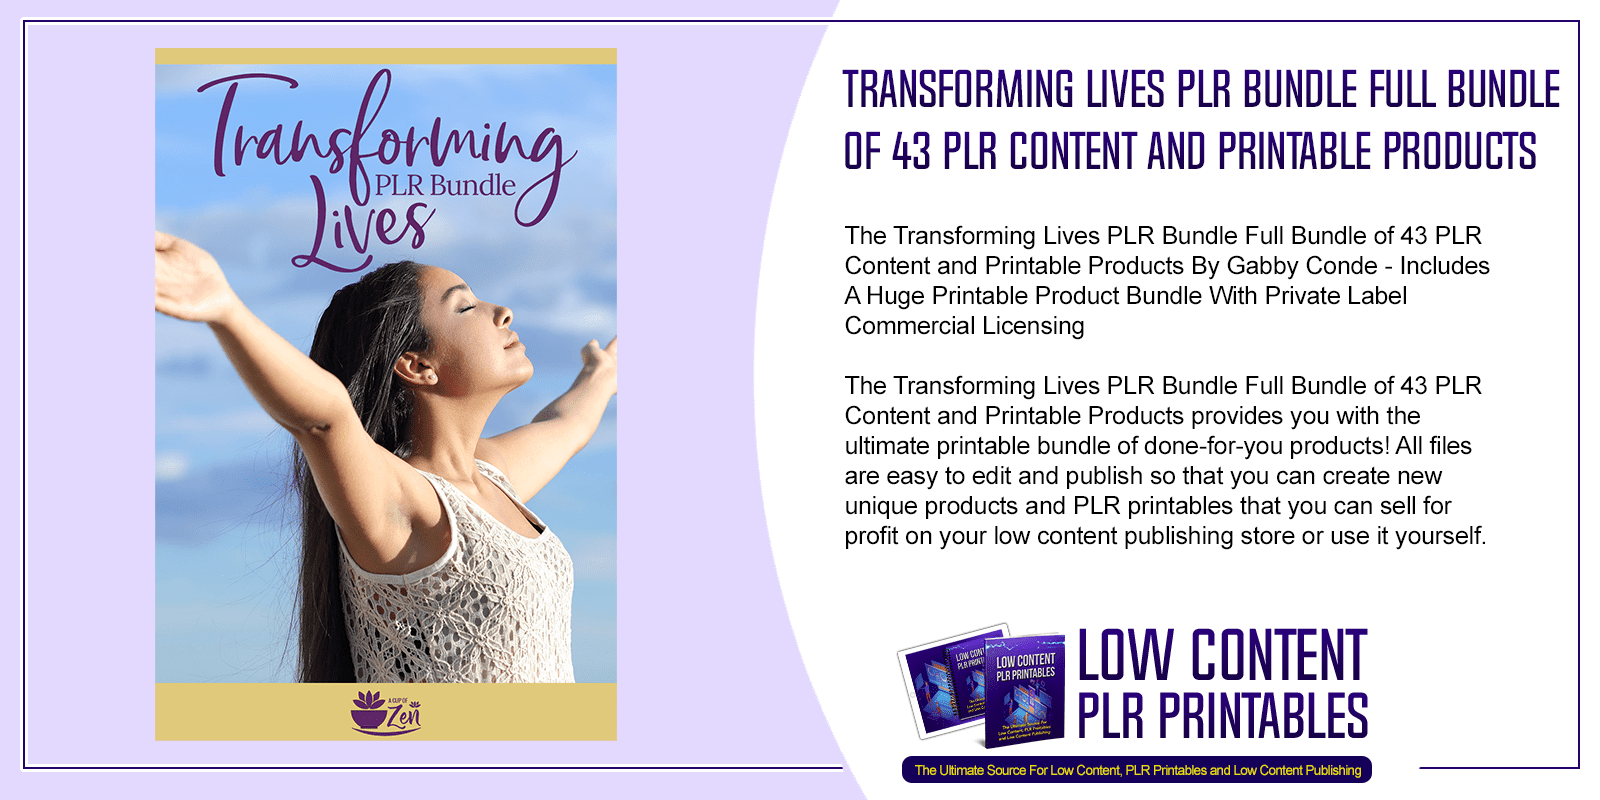 Transforming Lives PLR Bundle Full Bundle of 43 PLR Content and Printable Products